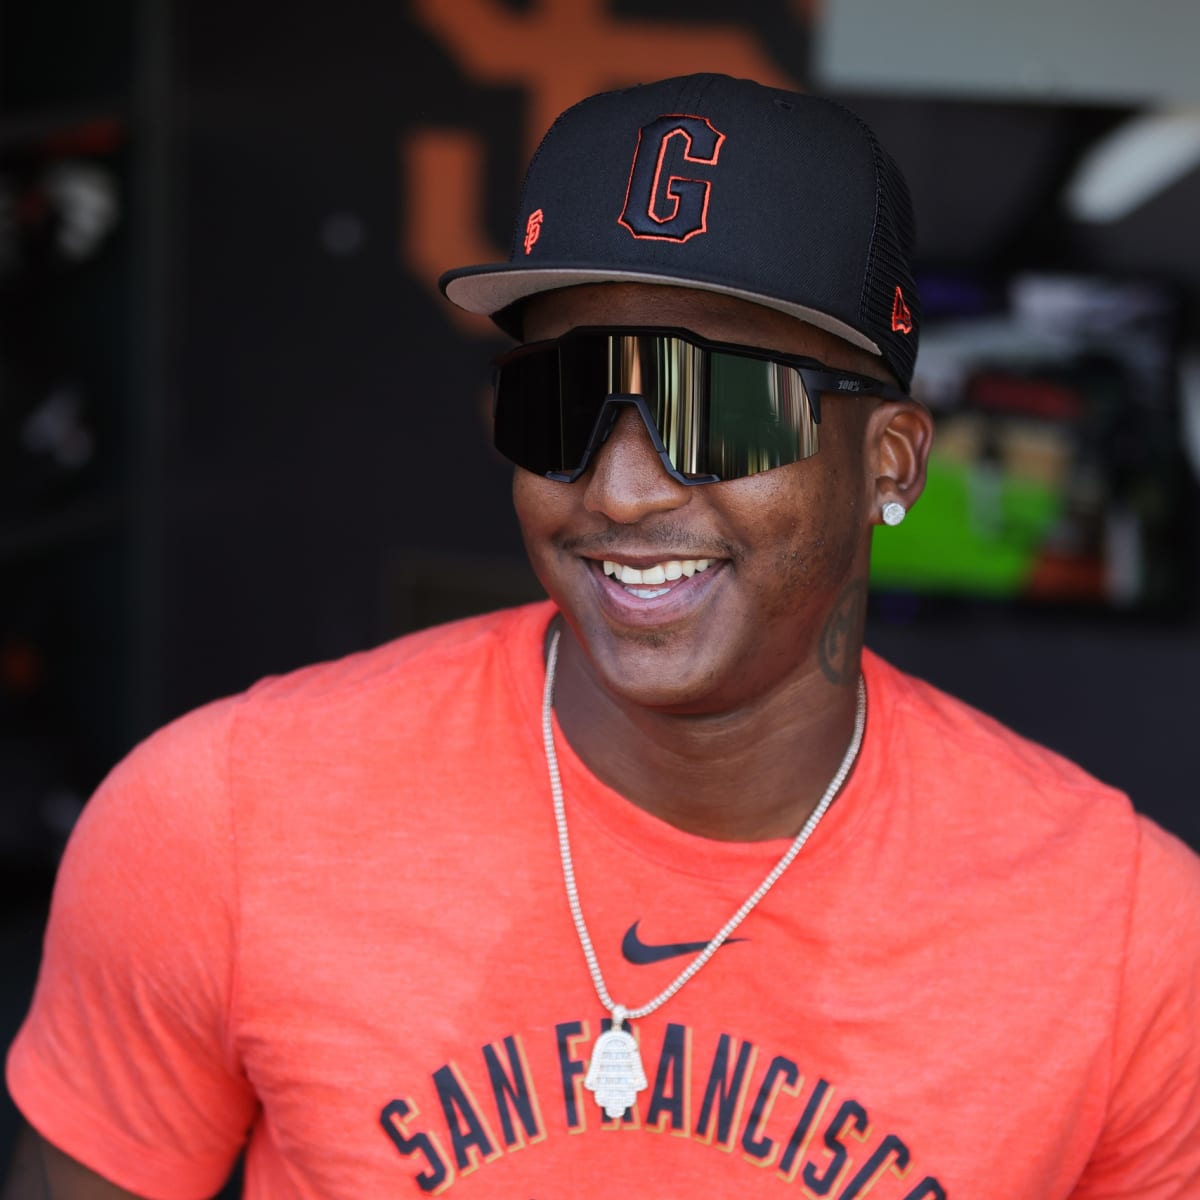 SF Giants call up top prospect Luciano to provide offensive jolt